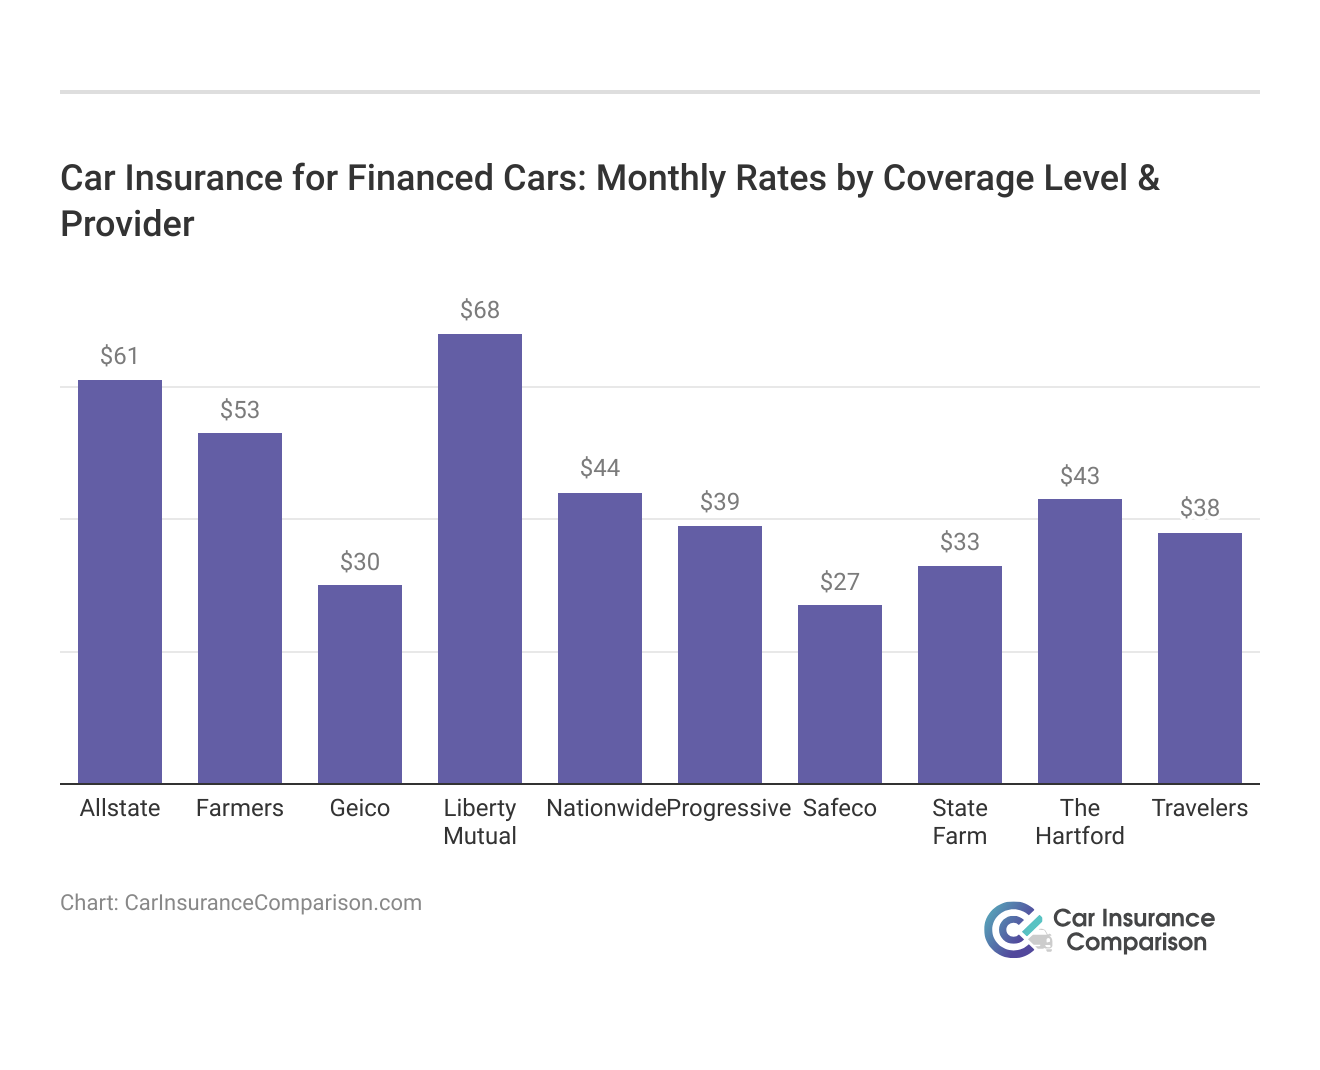 <h3>Car Insurance for Financed Cars: Monthly Rates by Coverage Level & Provider</h3>